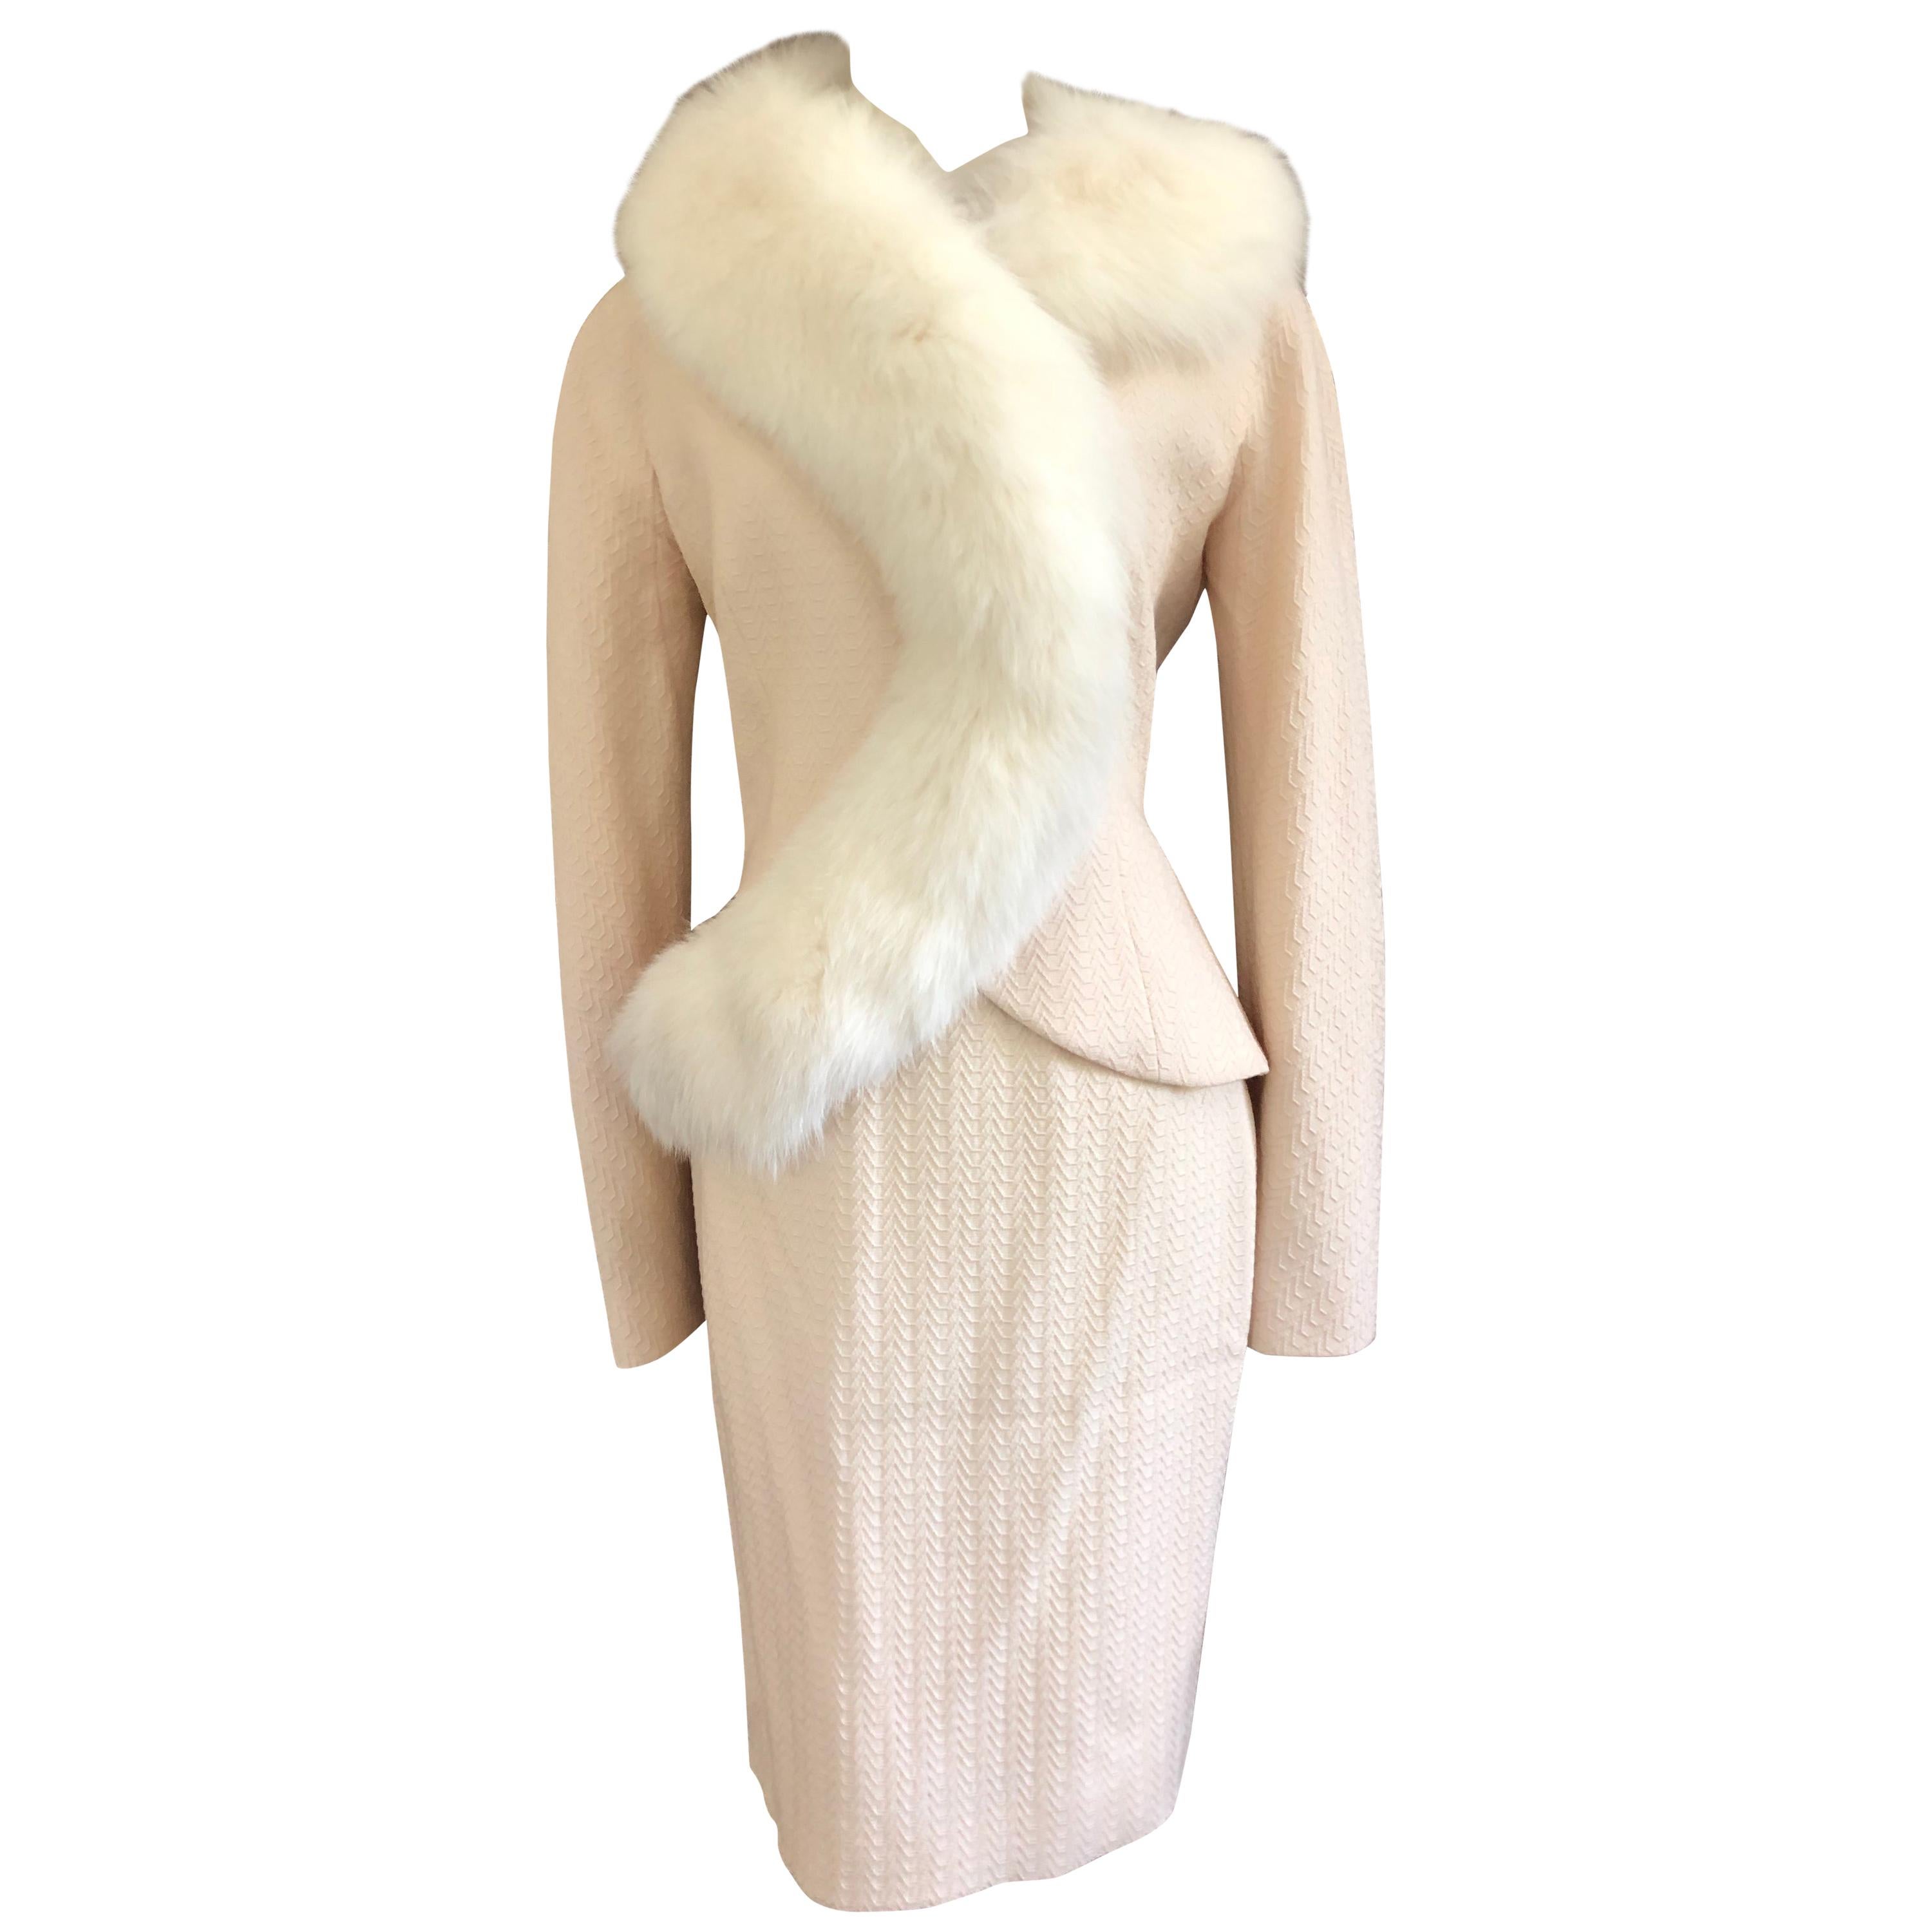  Christian Dior AW '97 by John Galliano Vintage Fox Fur Trim Jacket & Skirt Suit For Sale